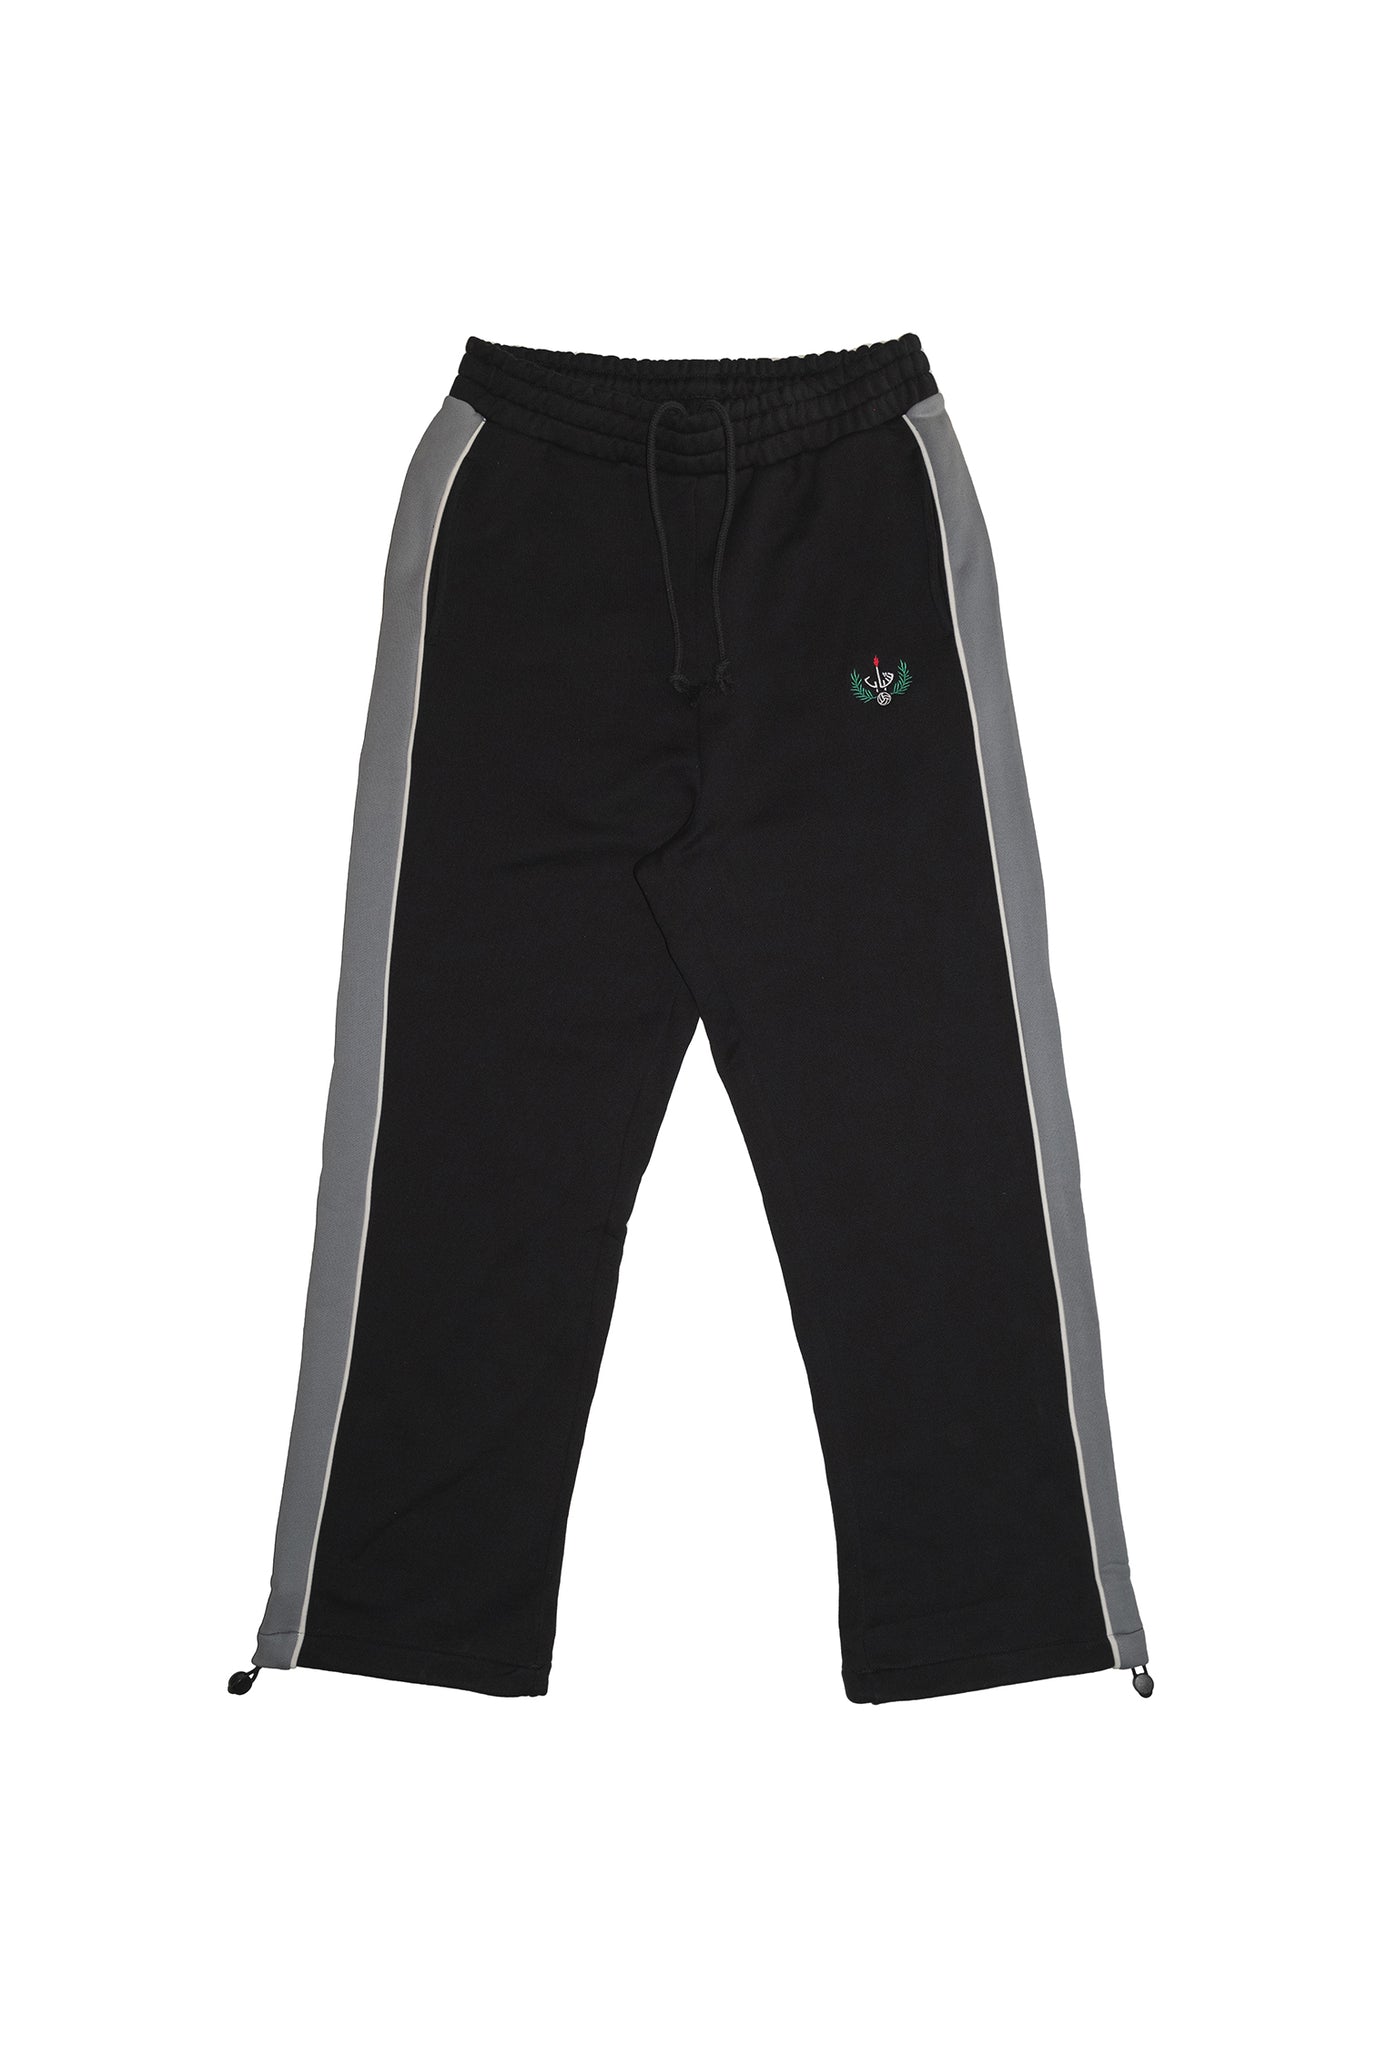 Sports and Leisure Sweatpants